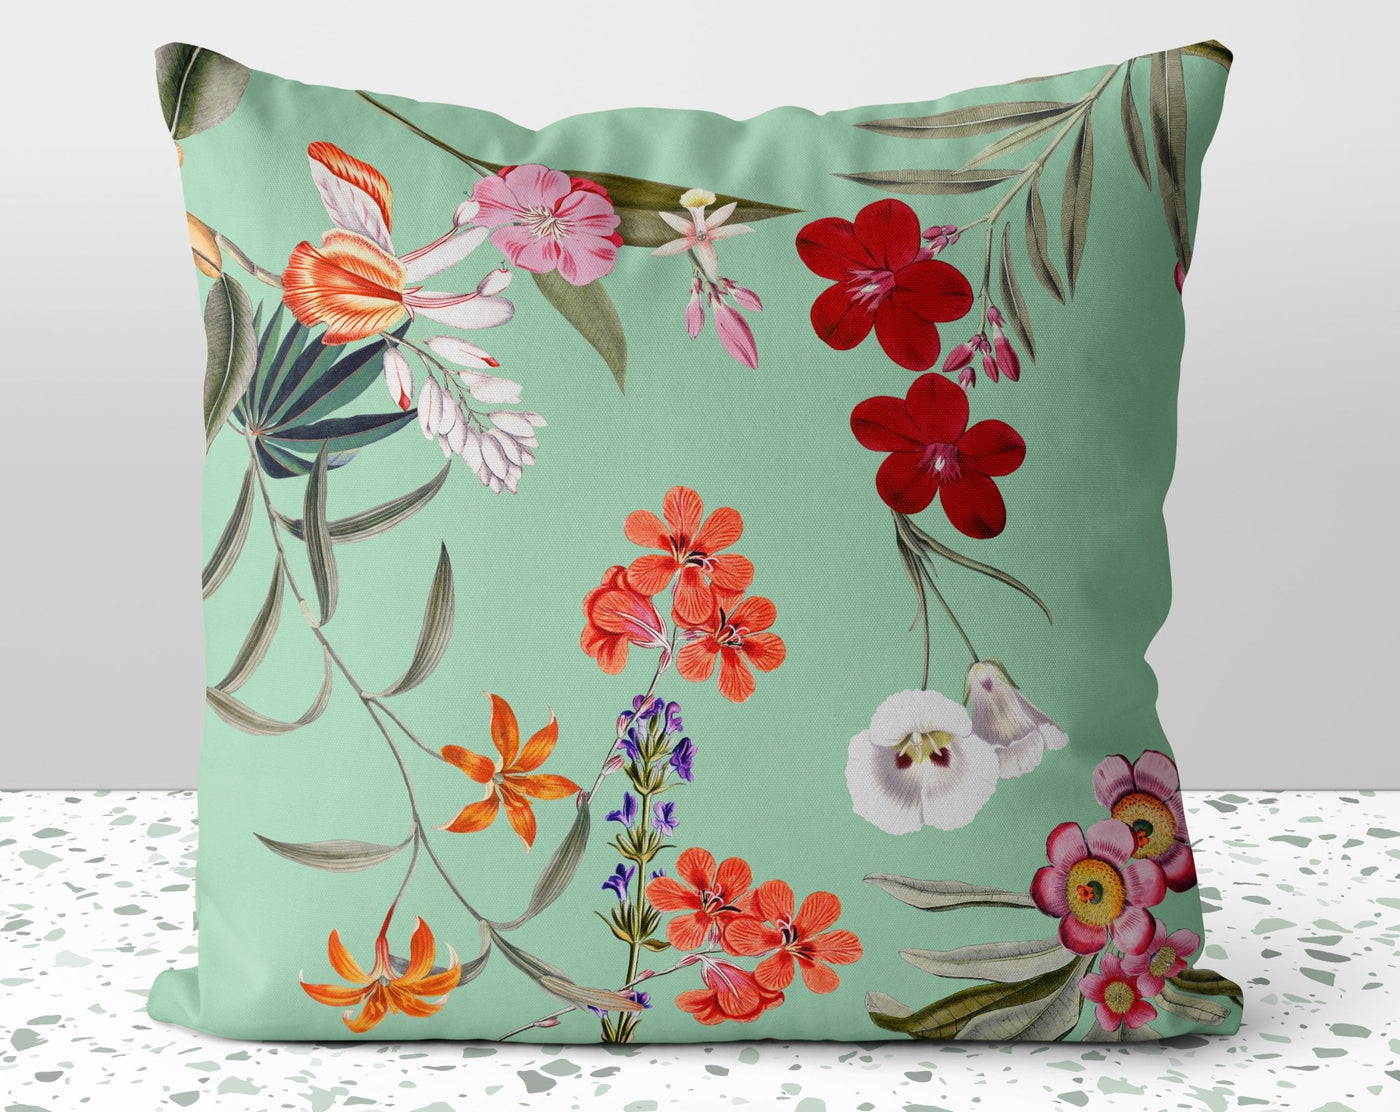 Fresh Floral Flowers on Green Square Pillow with Pink, Orange and Red Floral Accents with Cover Throw with Insert - Cush Potato Pillows